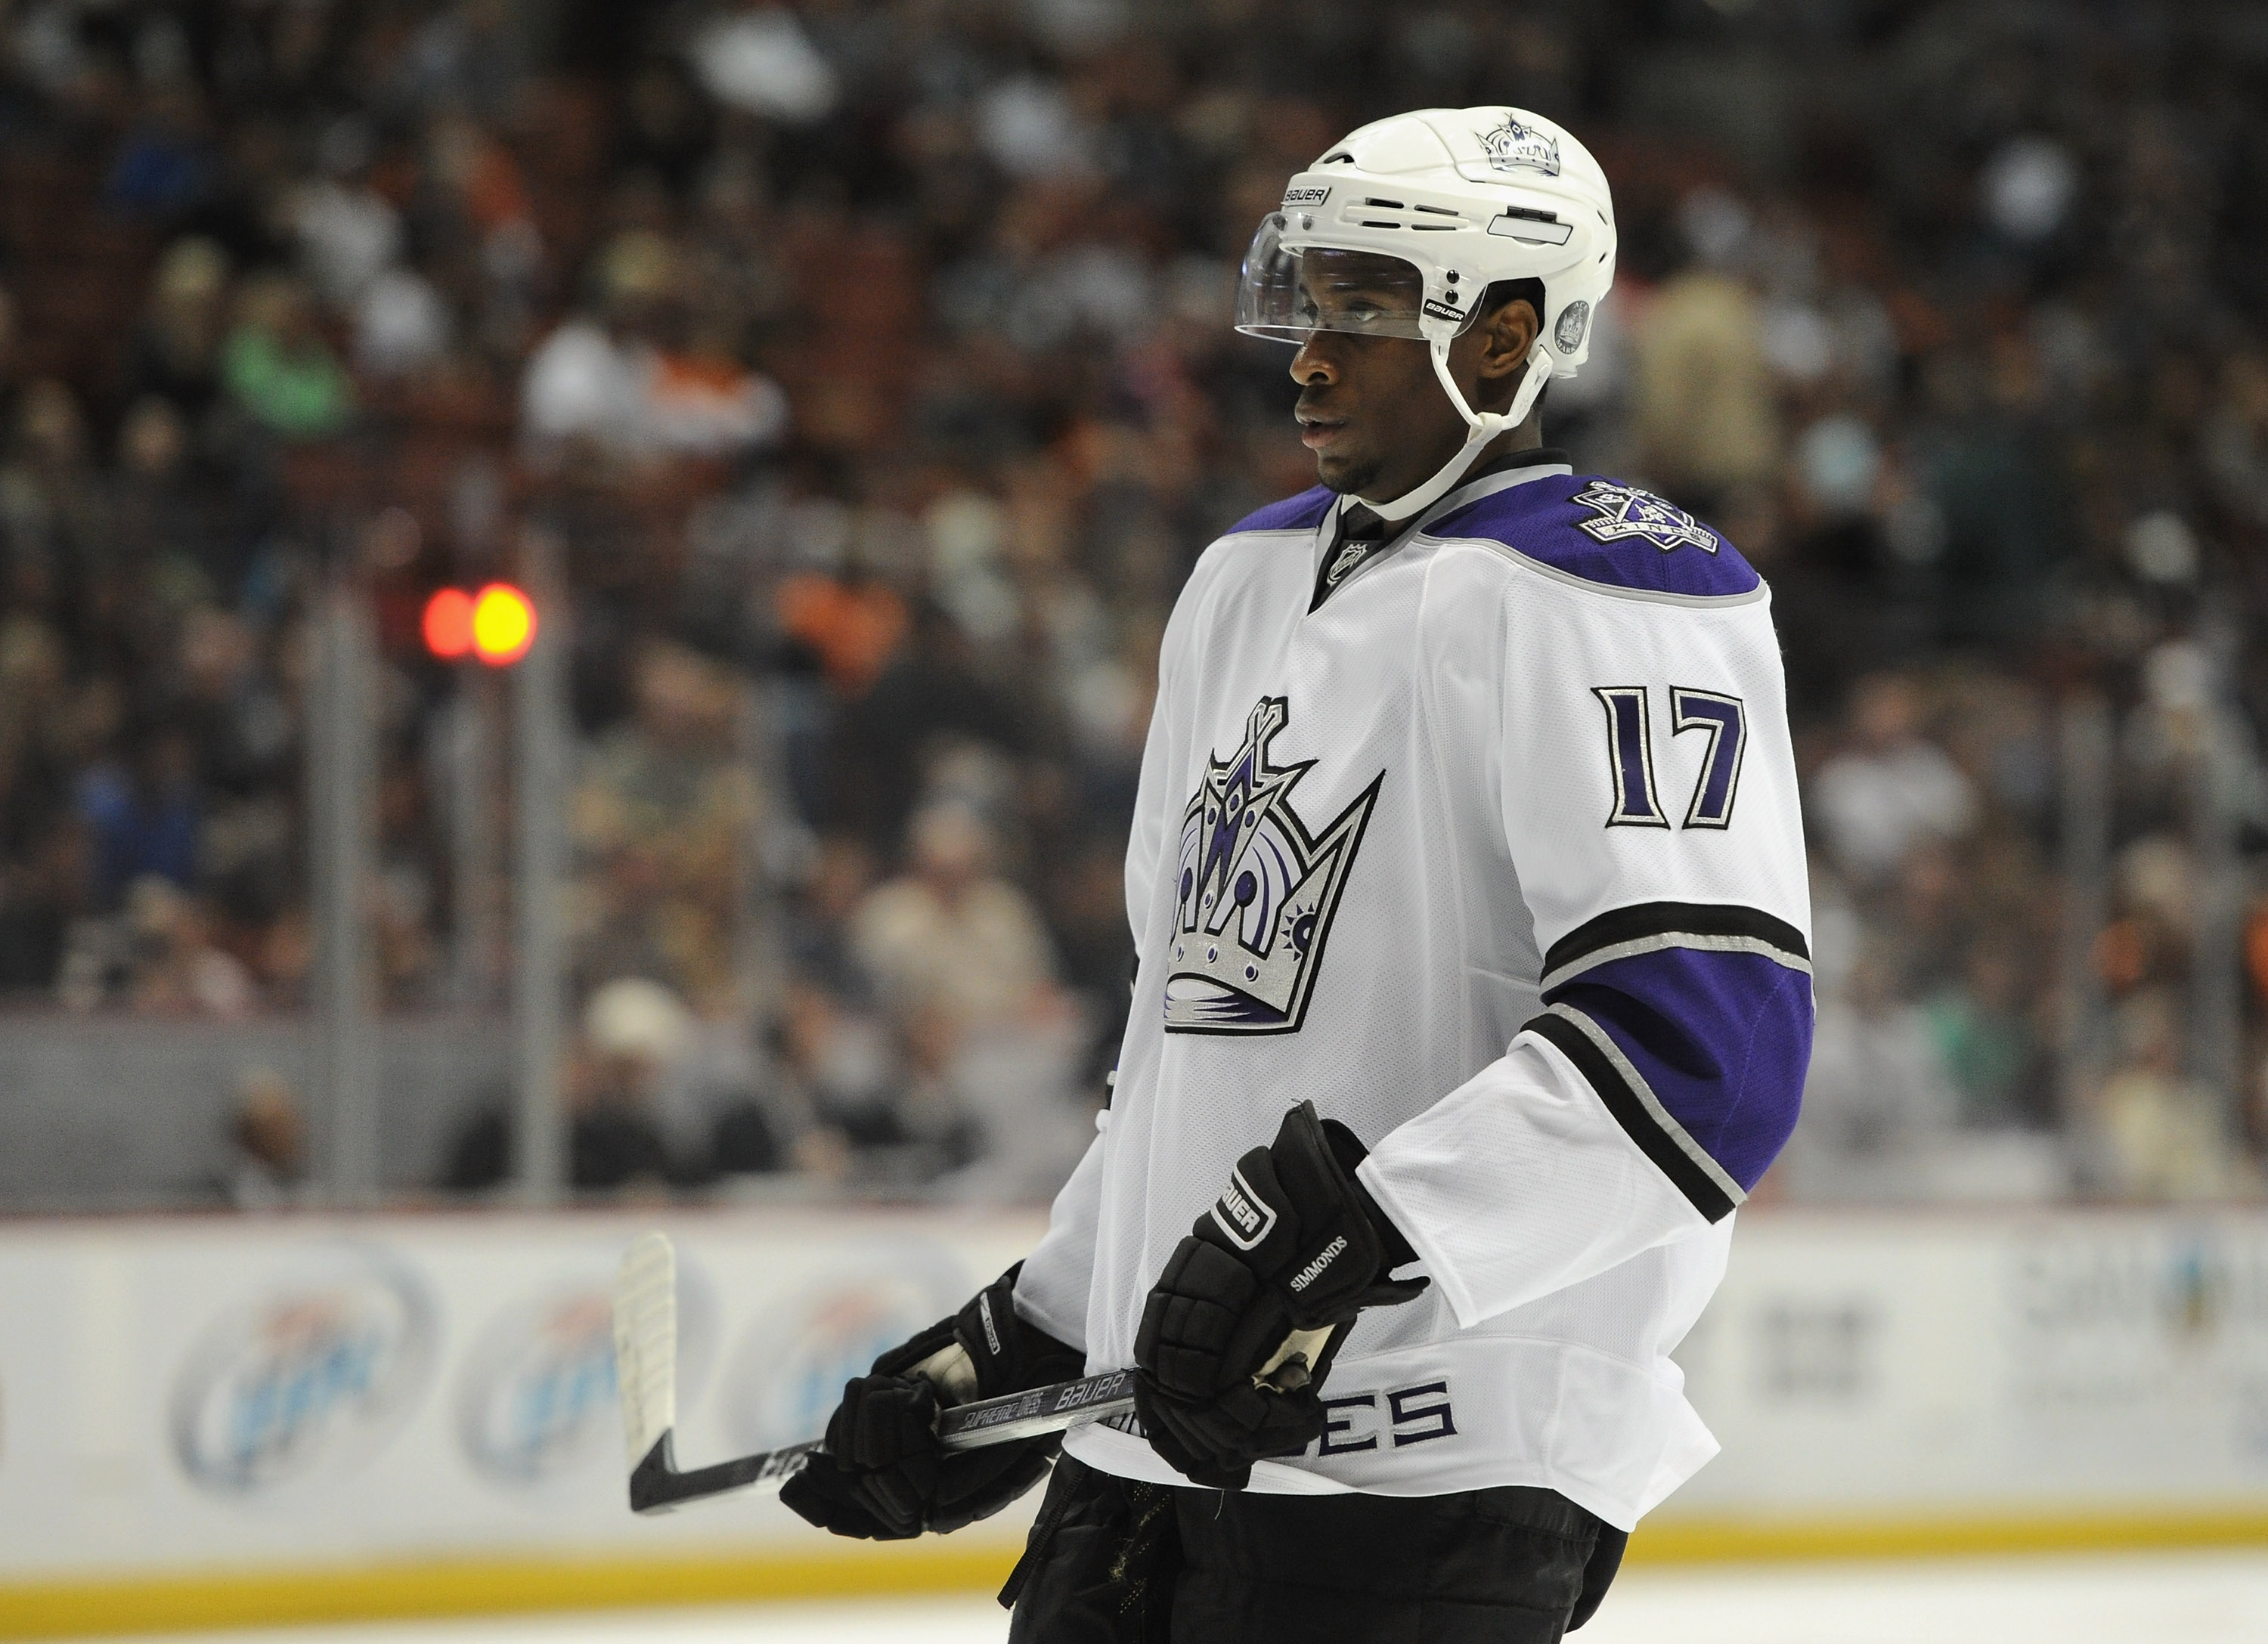 Toronto Maple Leafs Must Sit Wayne Simmonds for Game 3